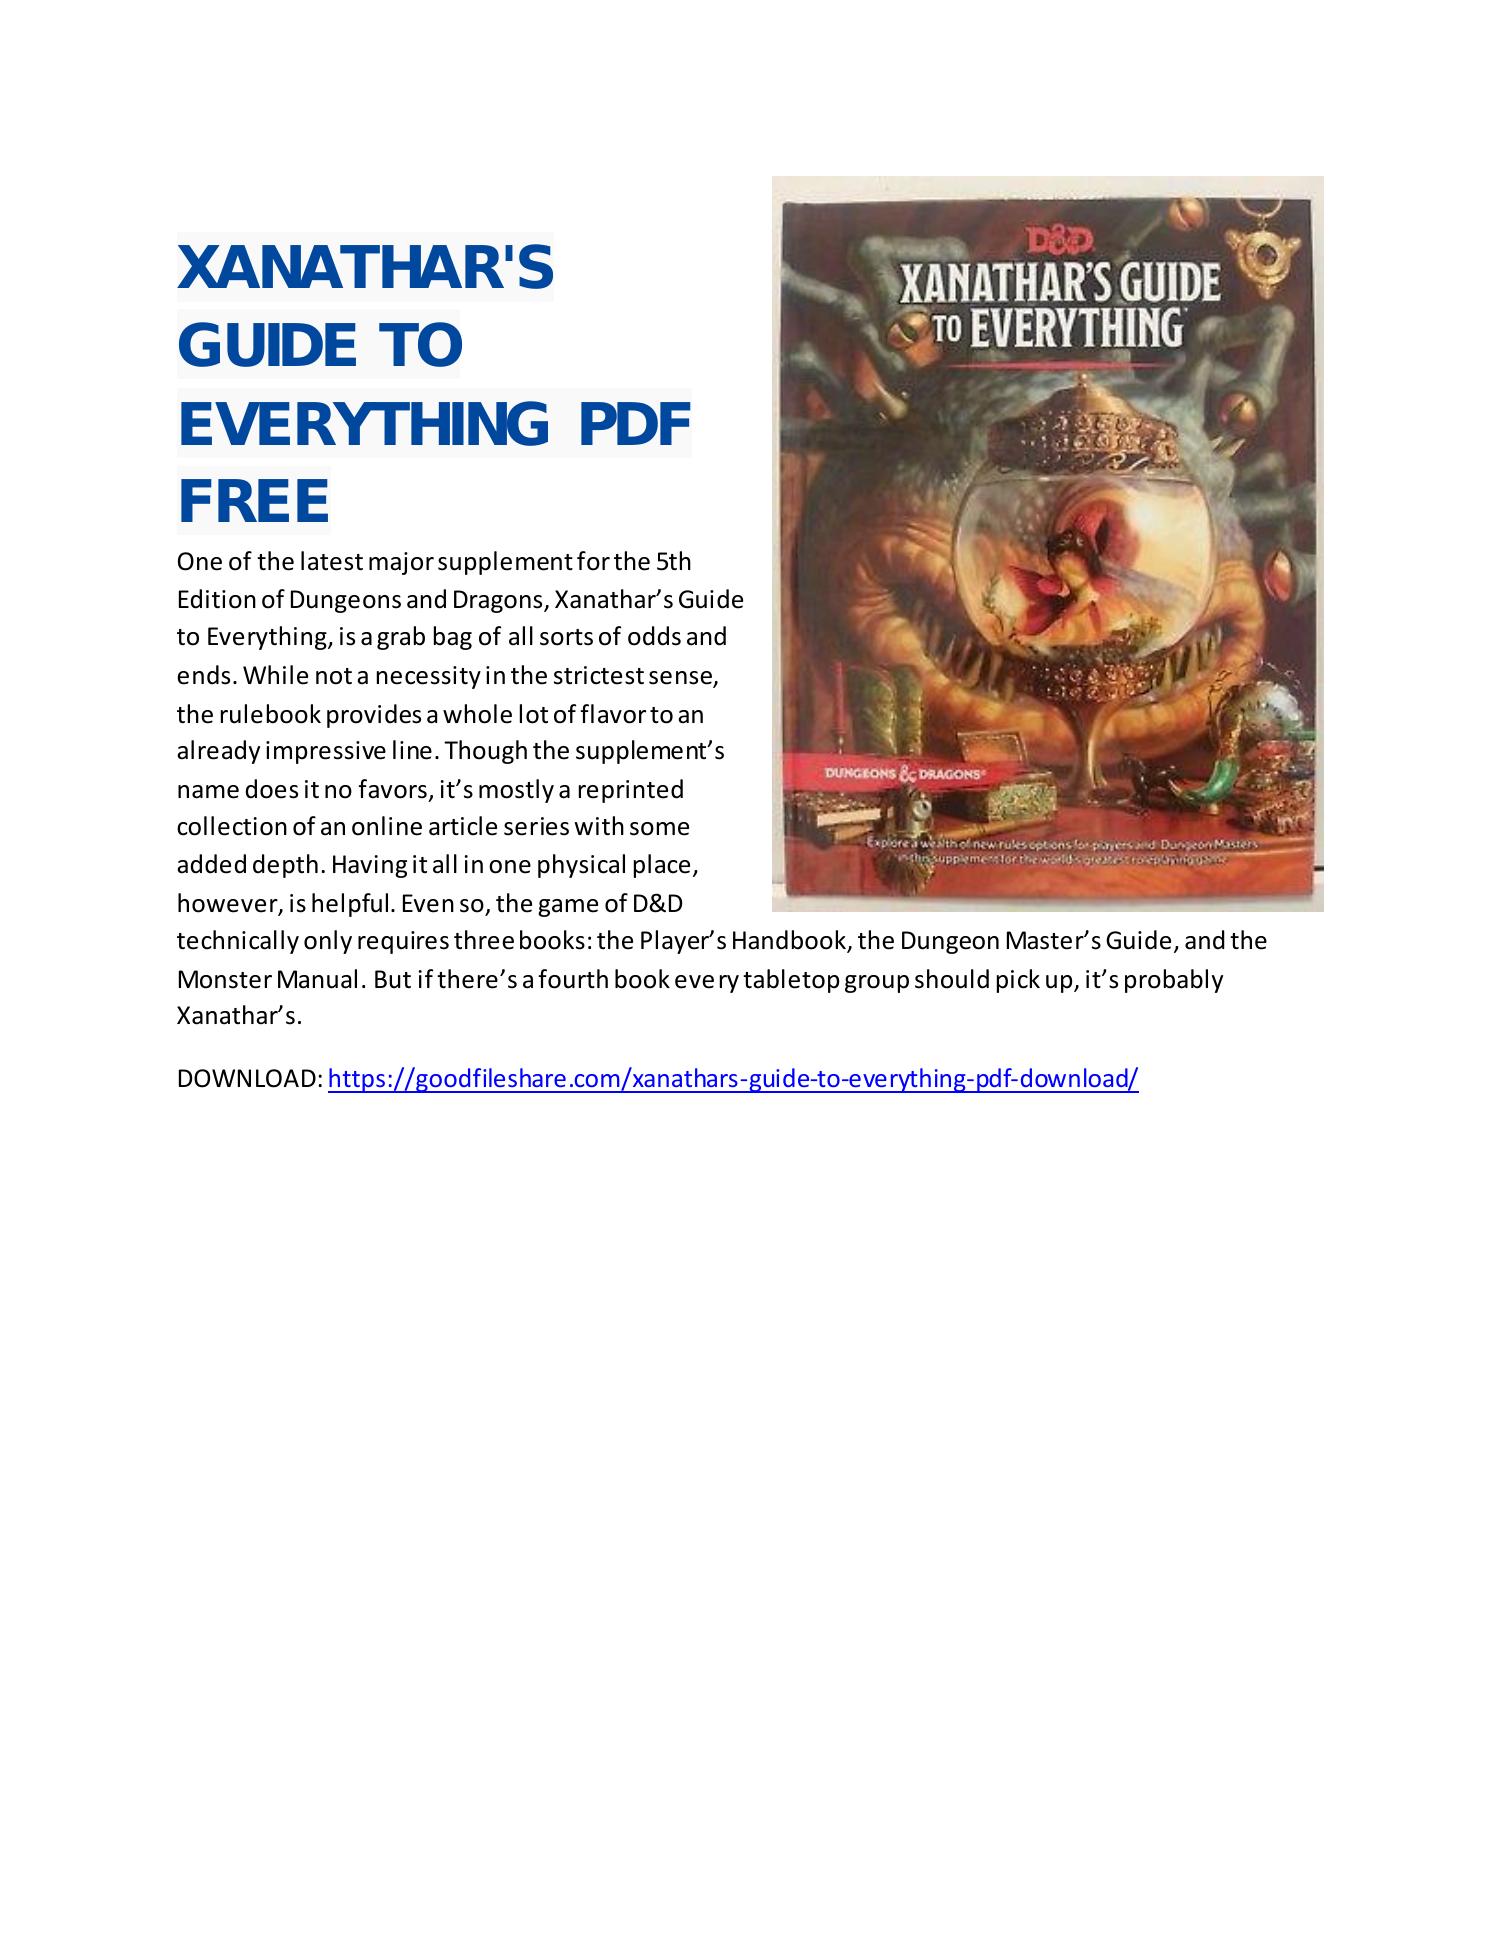 xanathars guide to everything pdf download free